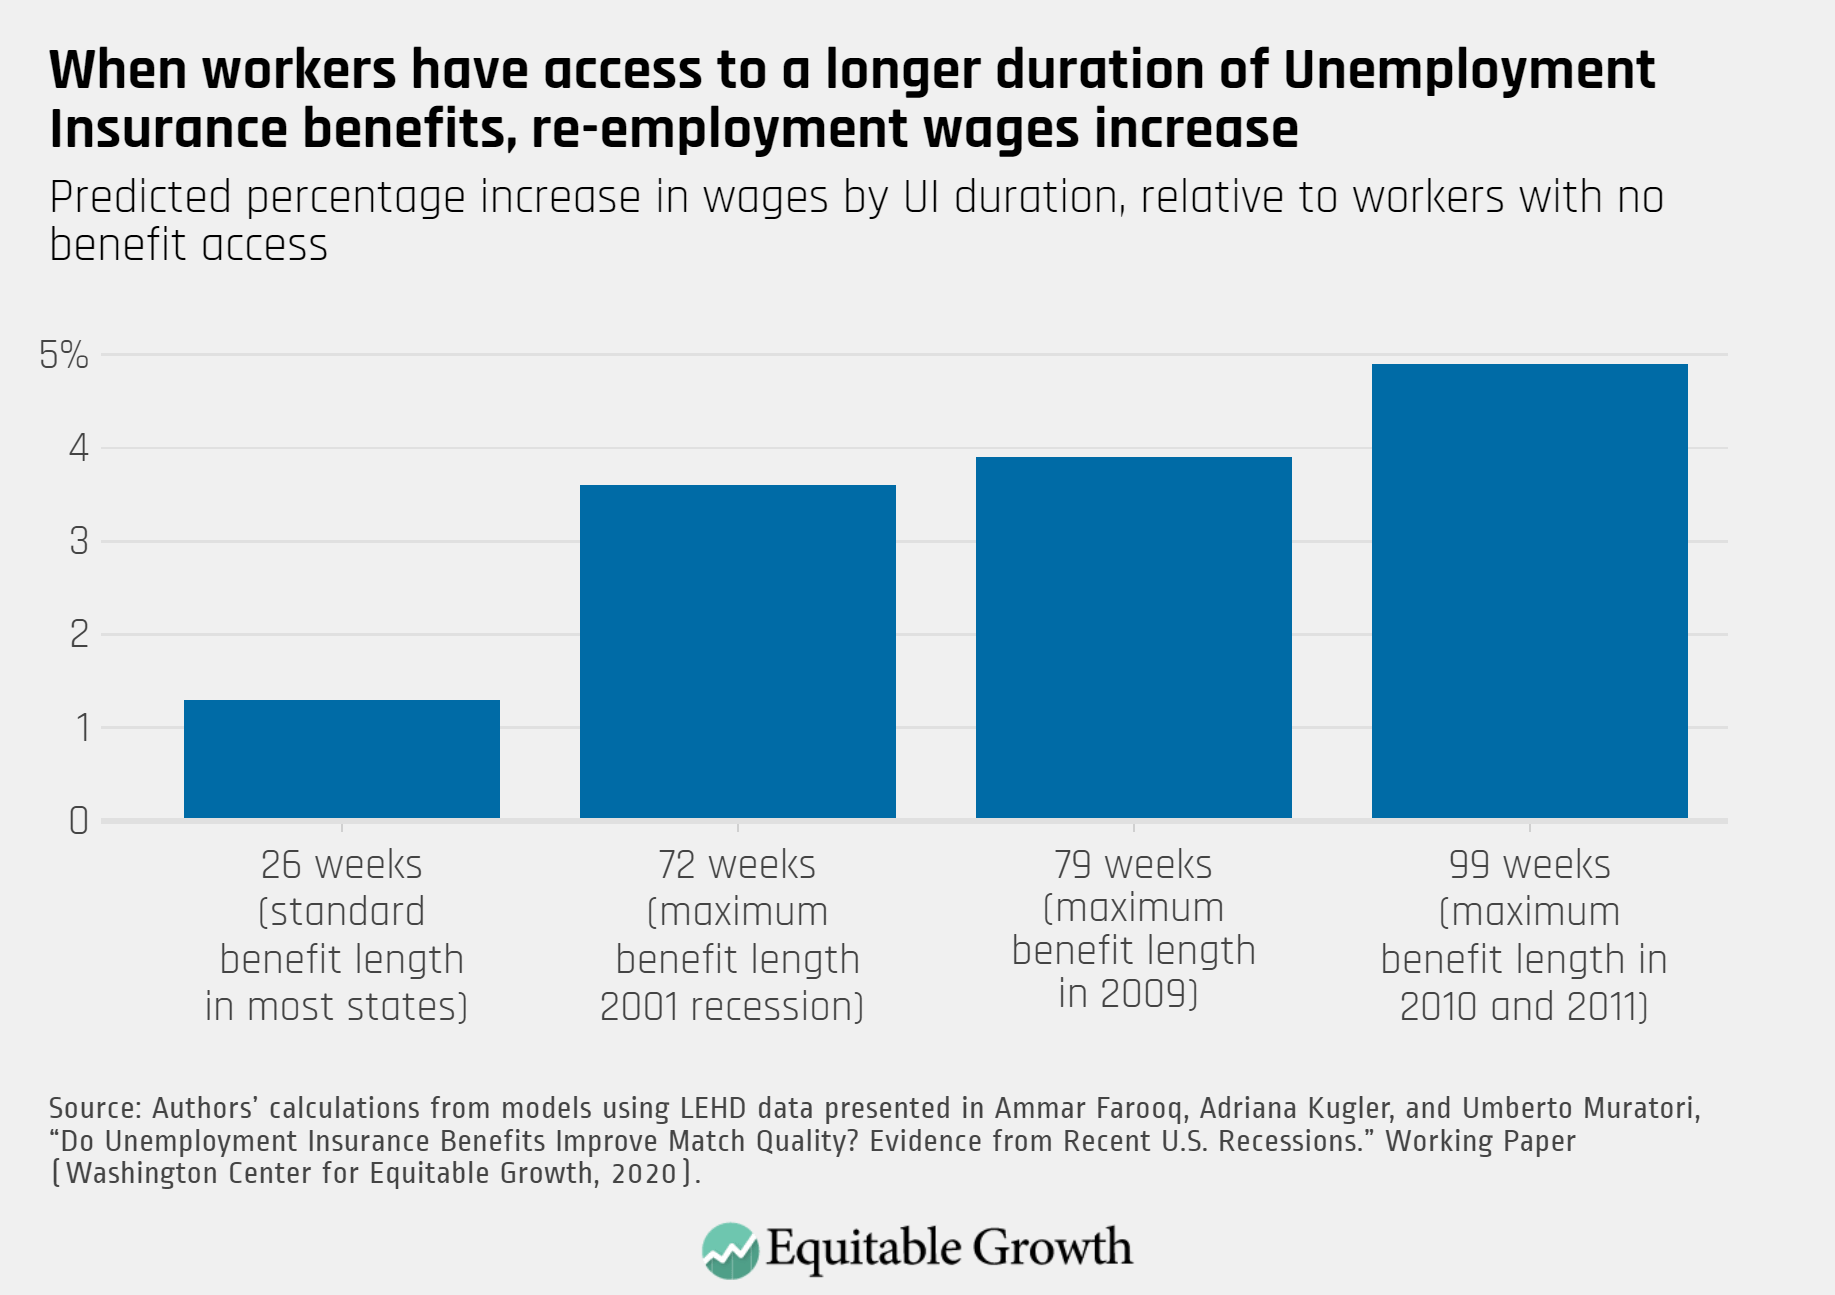 The longrun implications of extending unemployment benefits in the